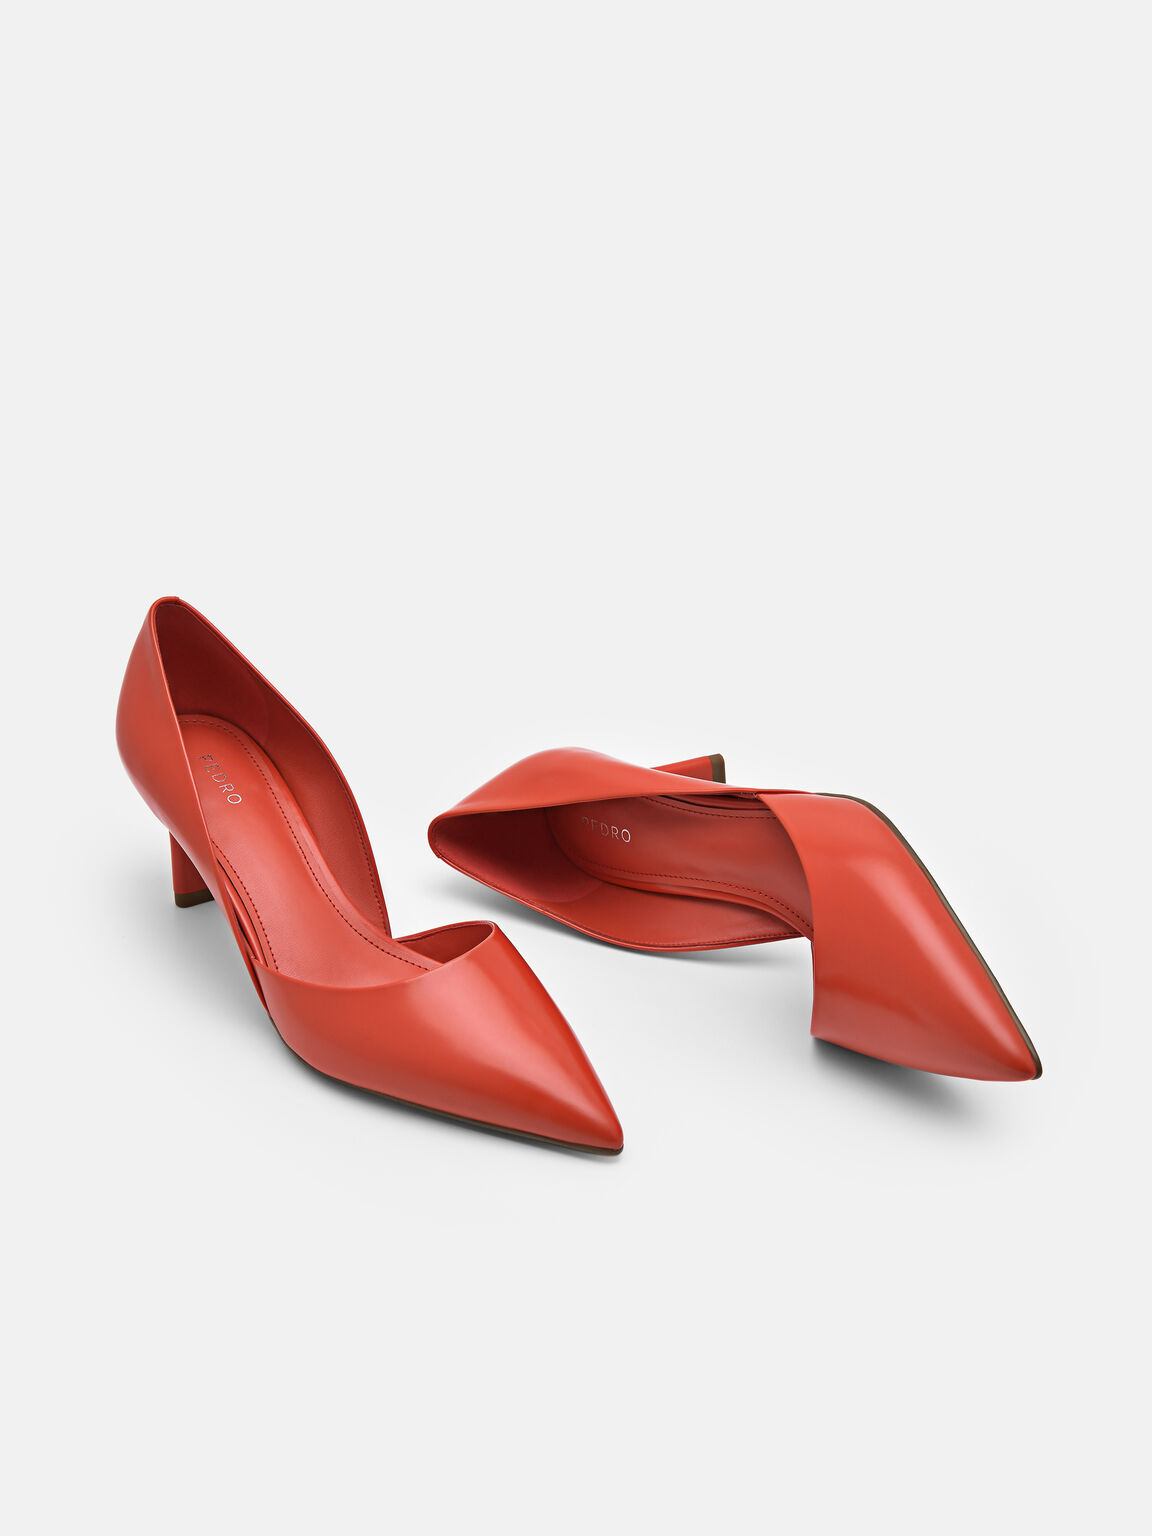 Rocco Leather Heel D'Orsay Pumps, Red, hi-res